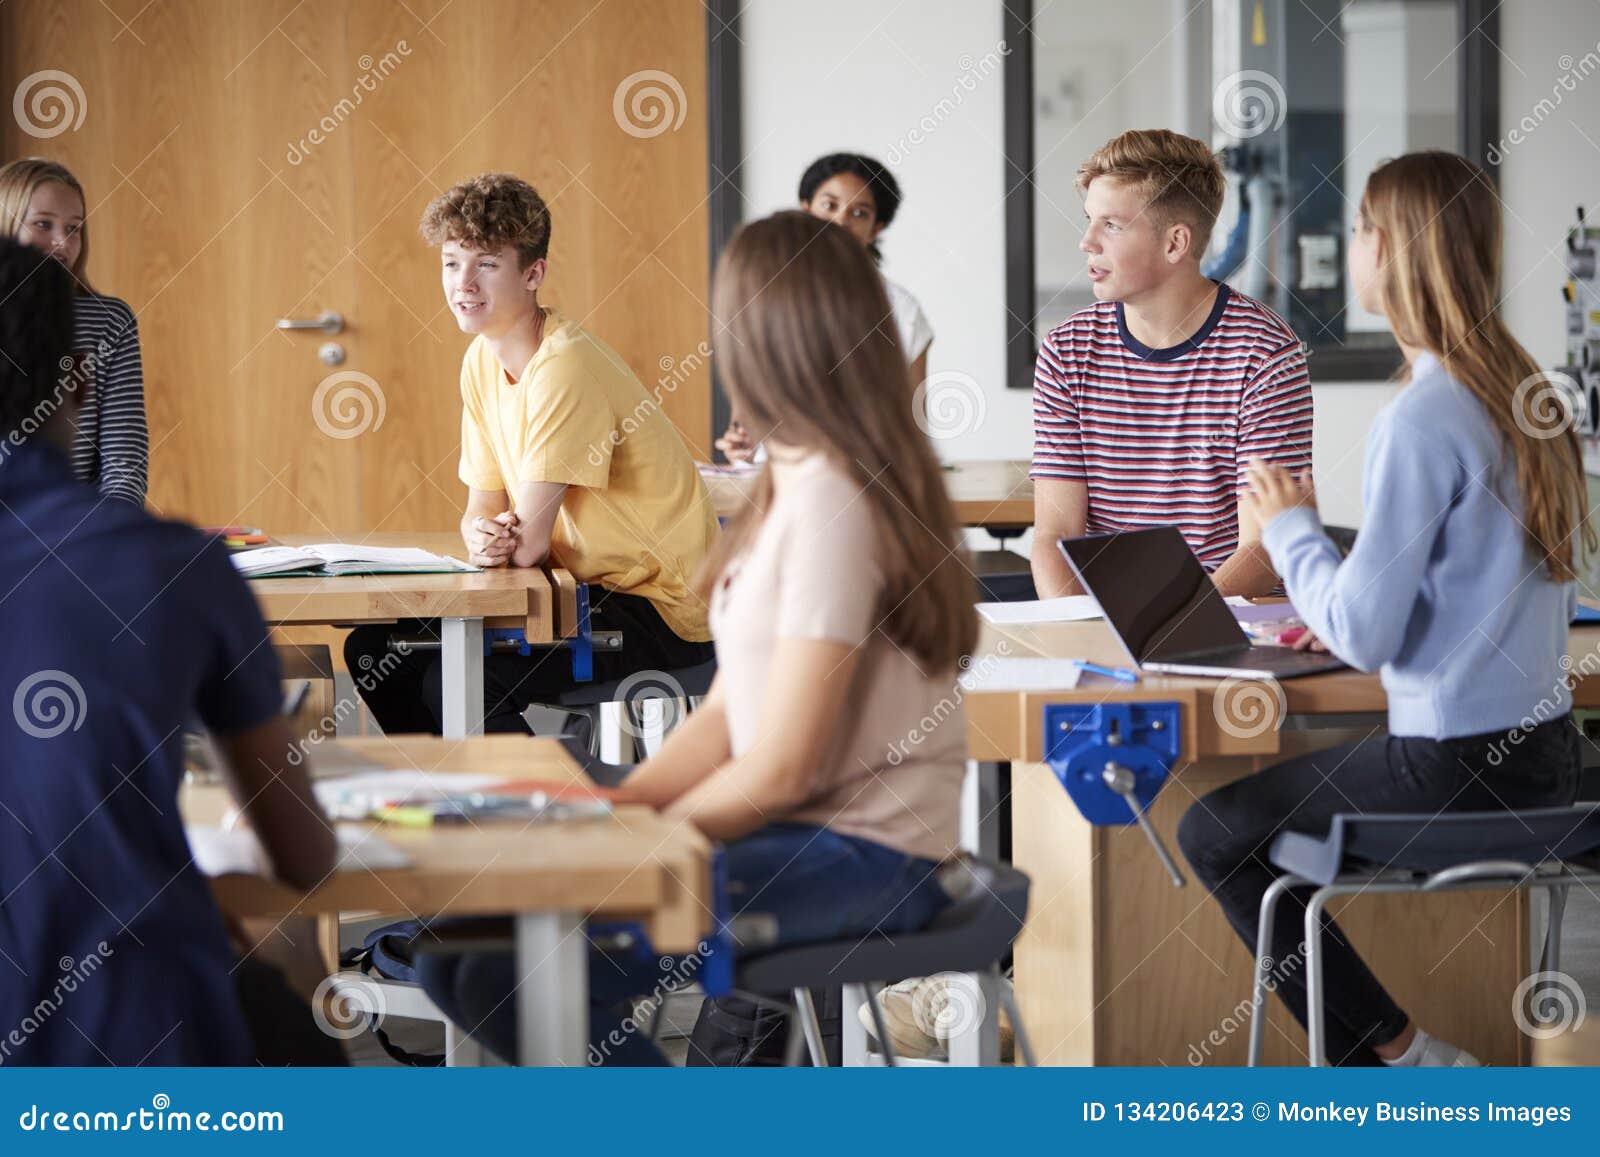 Group of High School Students Sitting at Work Benches Having Discussion in  Design and Technology Lesson Stock Image - Image of college, carpentry:  134206423